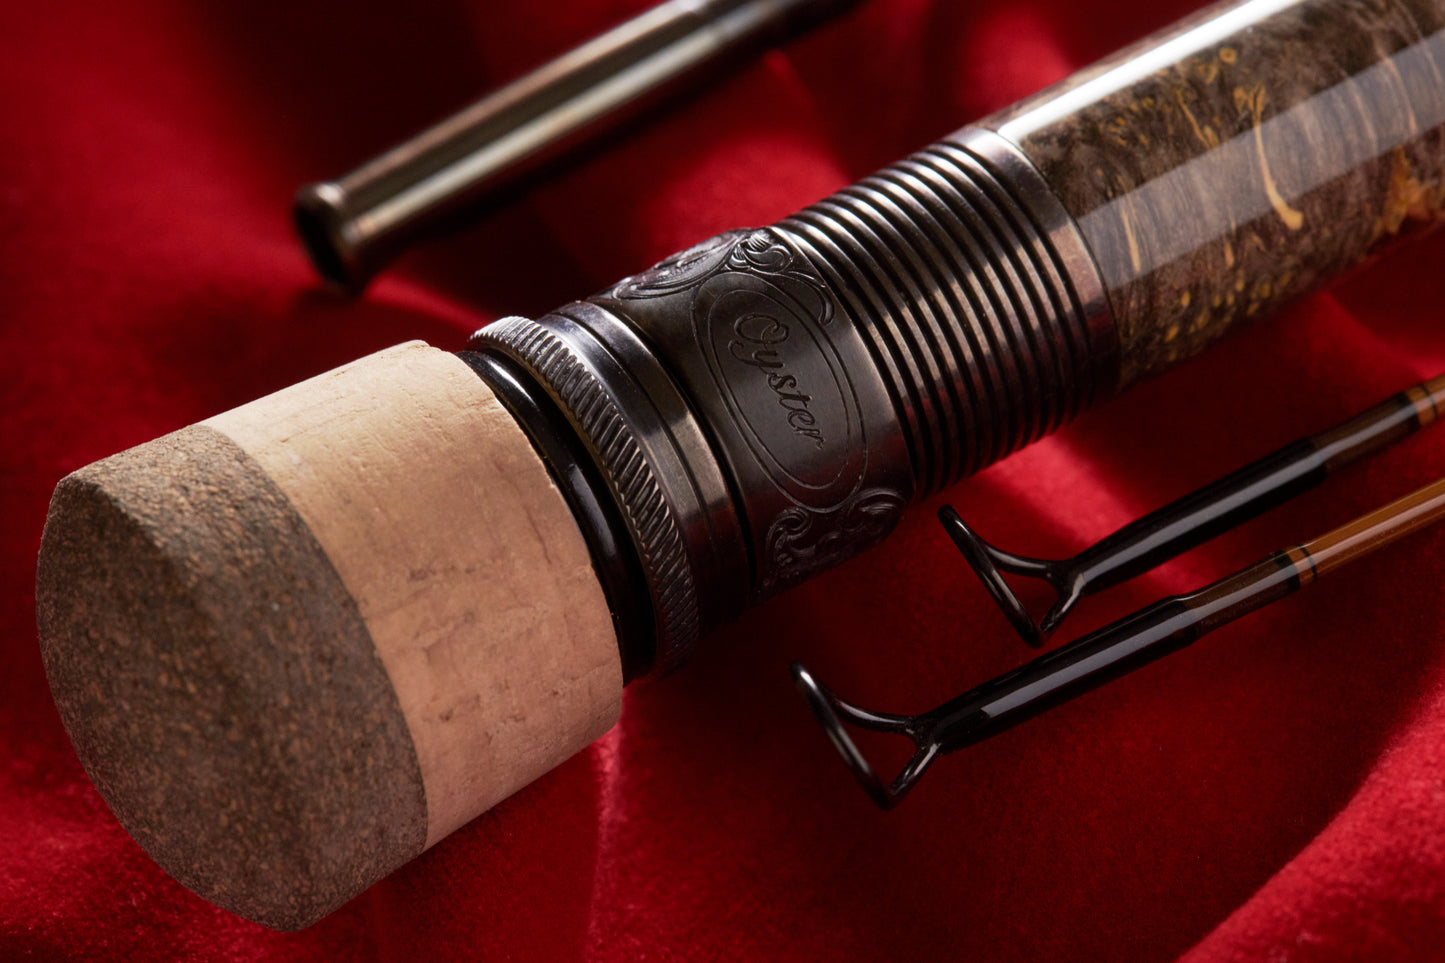 DEPOSIT for Customized Bamboo Fly Rod